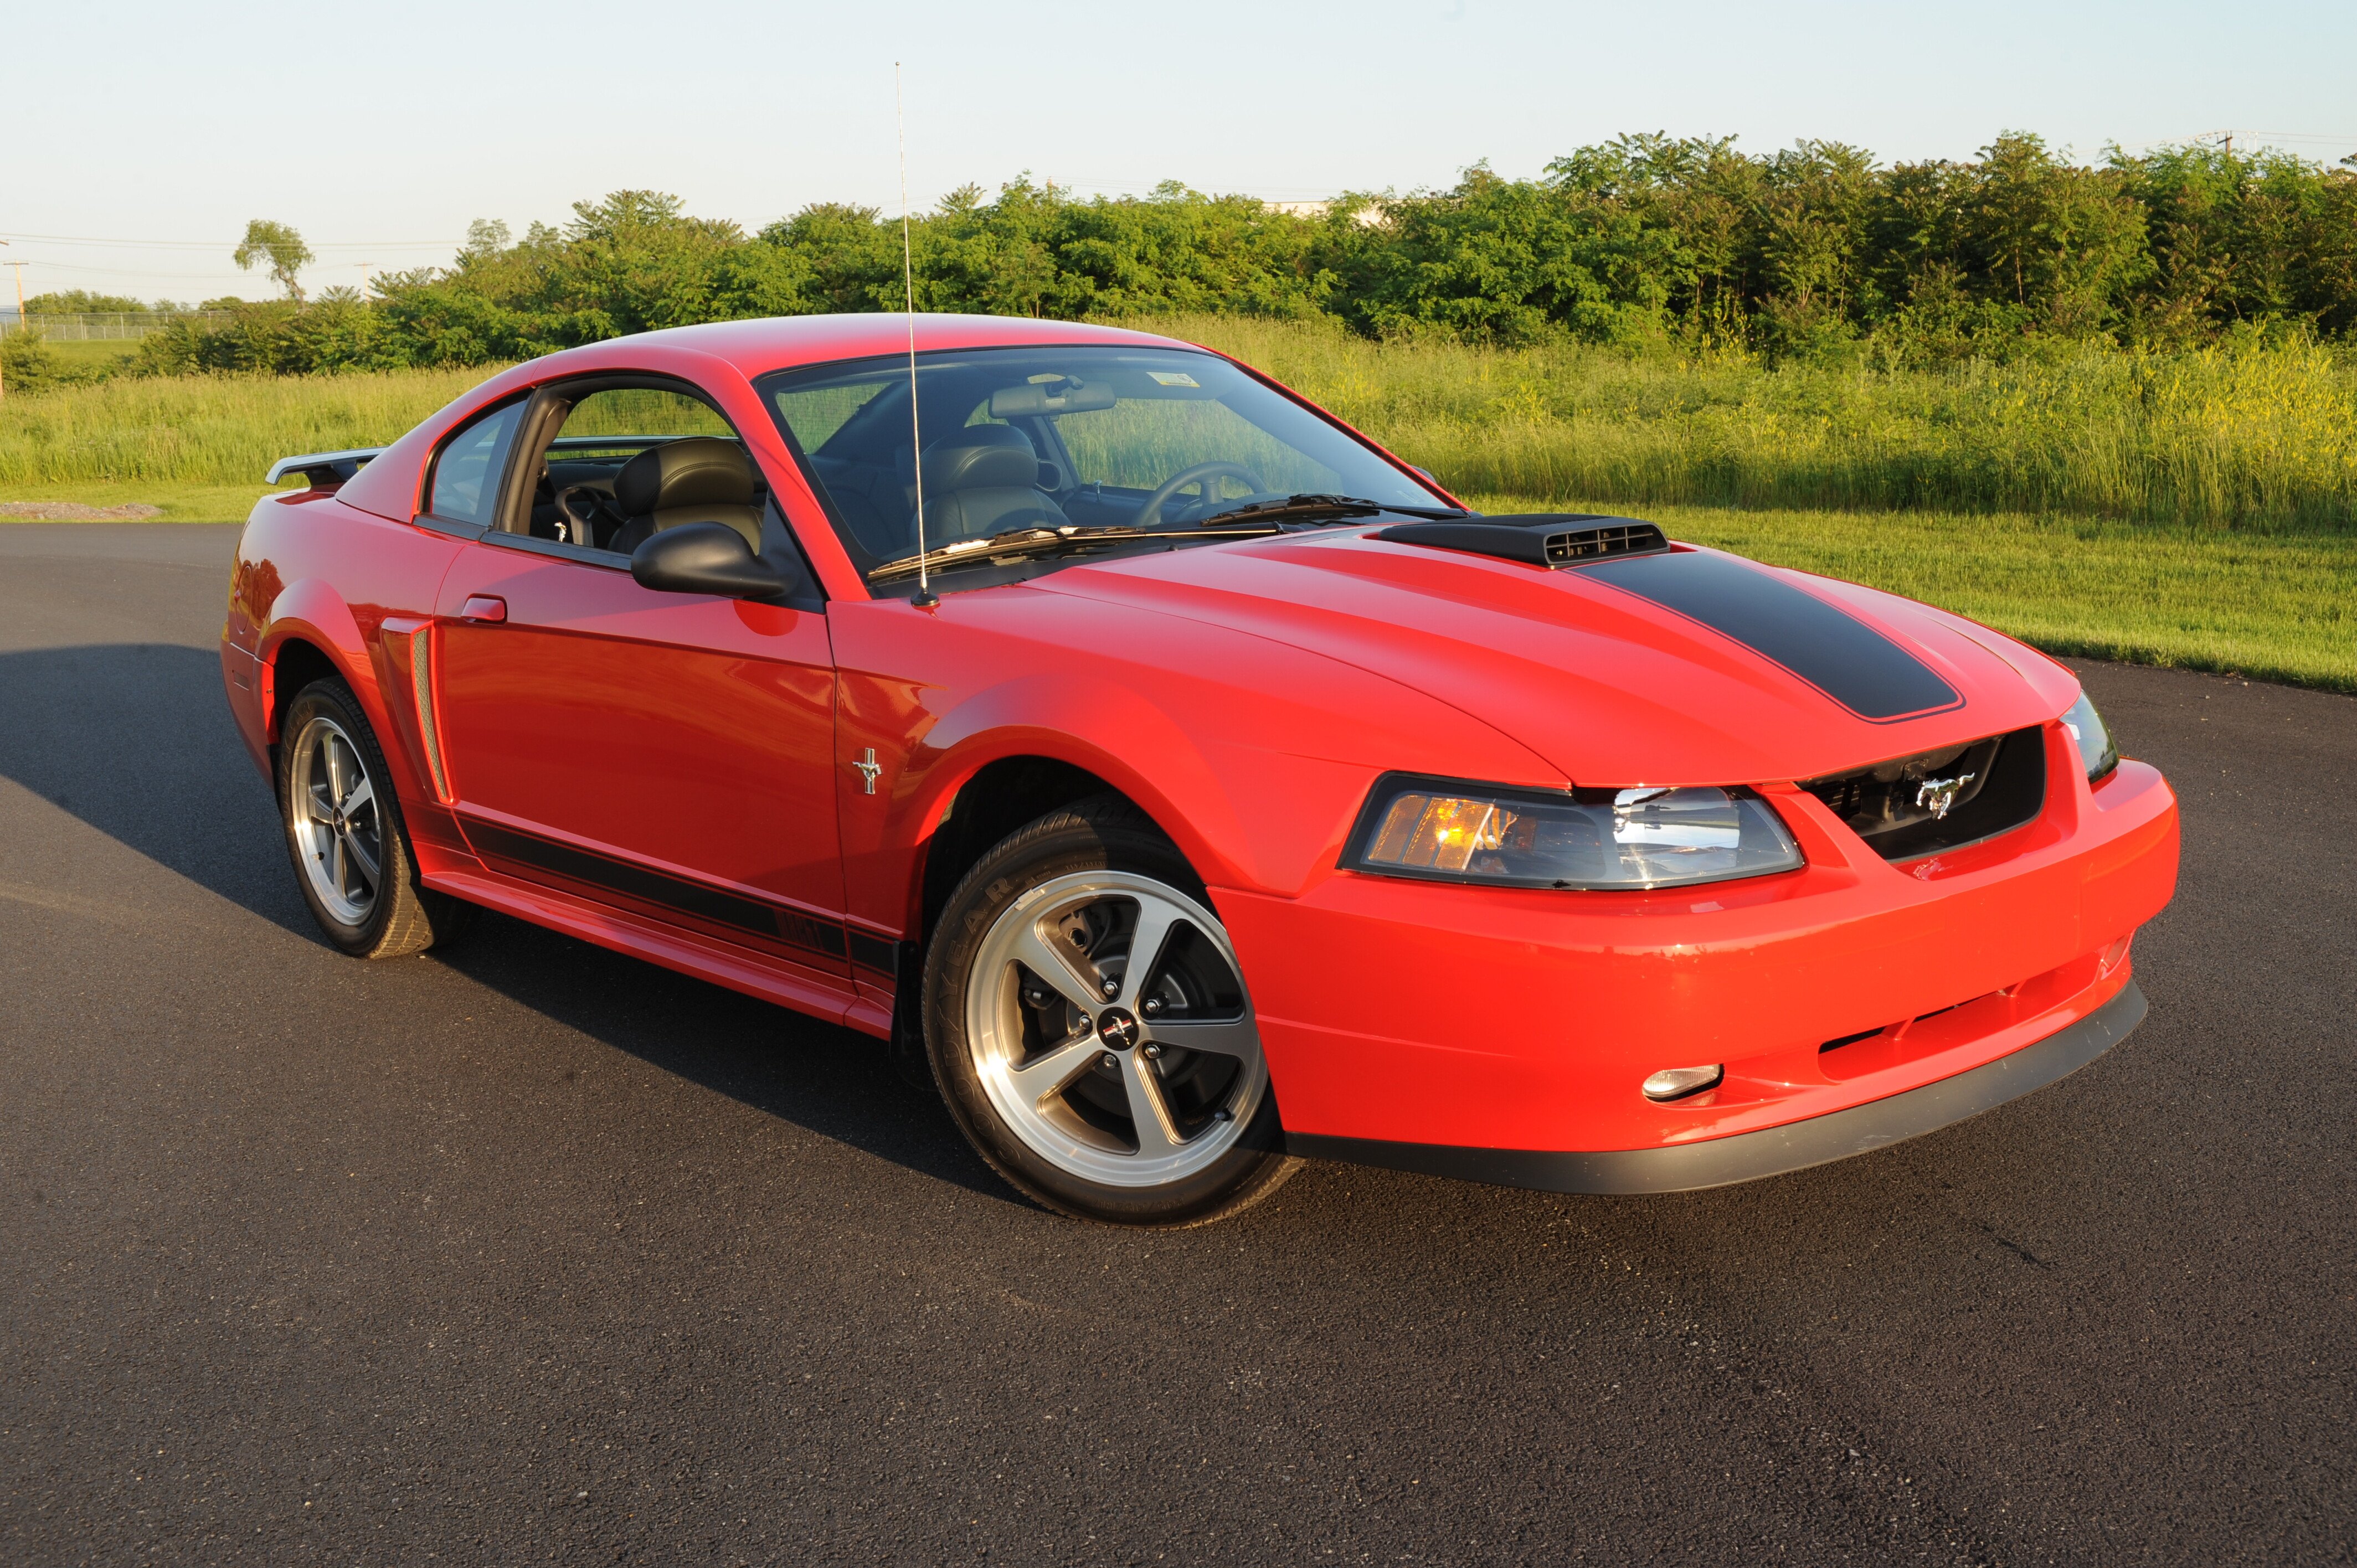 2003 Mustang Mach 1 - Classics on Autotrader